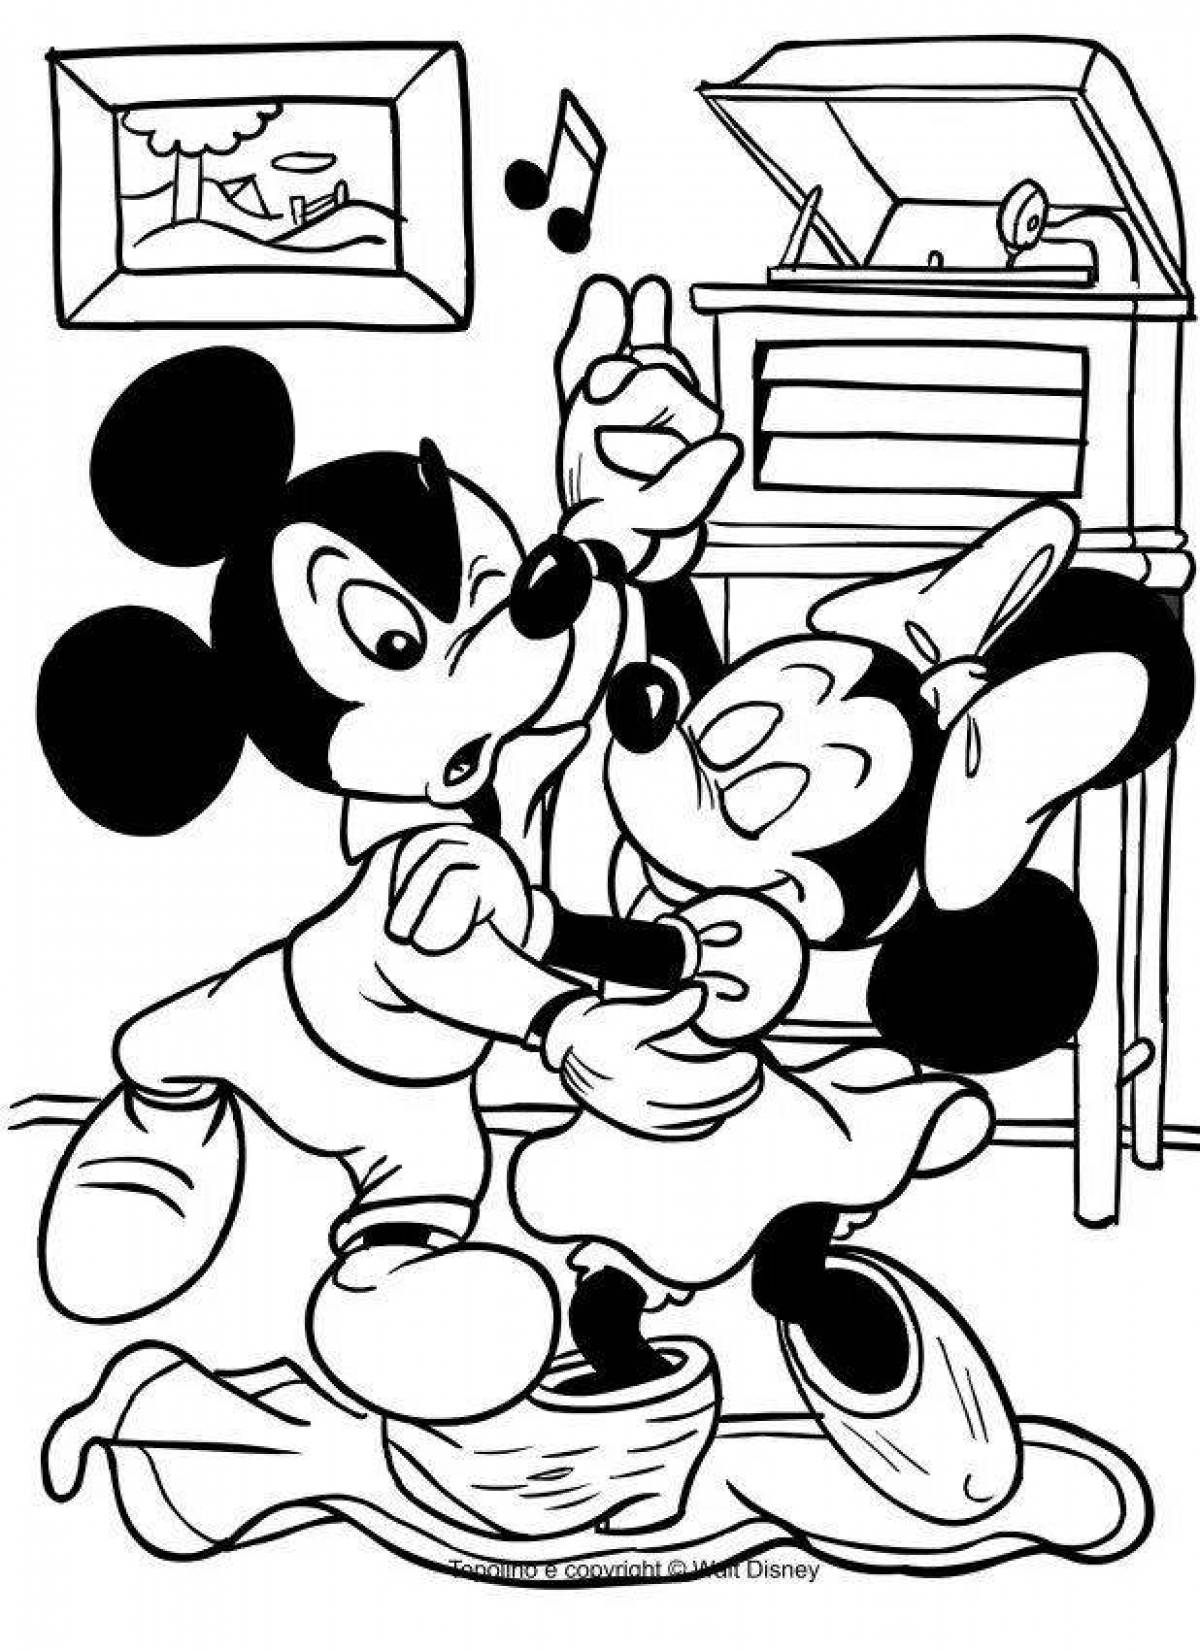 Mickey Mouse and Minnie Mouse Live Coloring